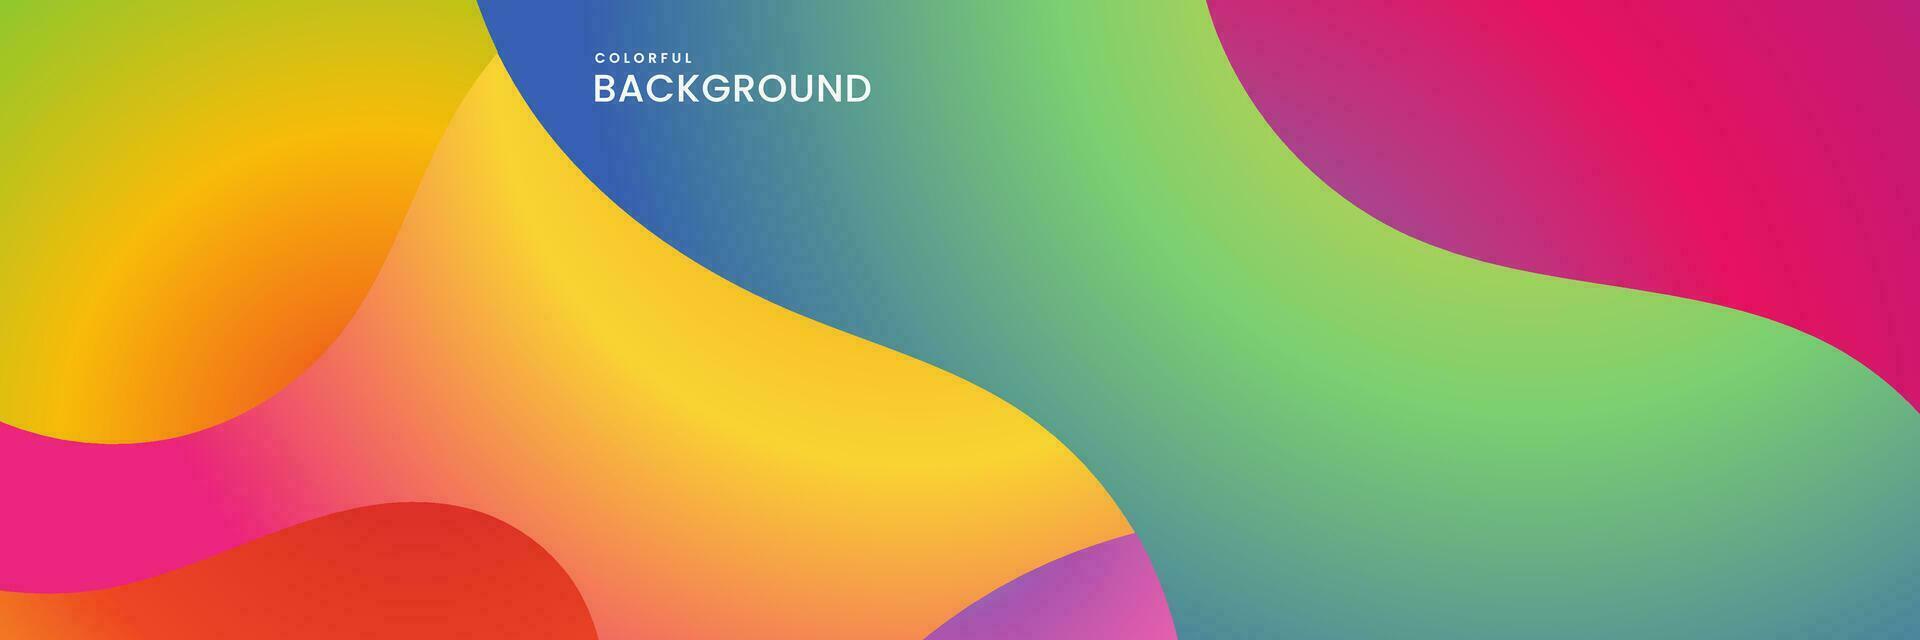 abstract creative art colorful background vector